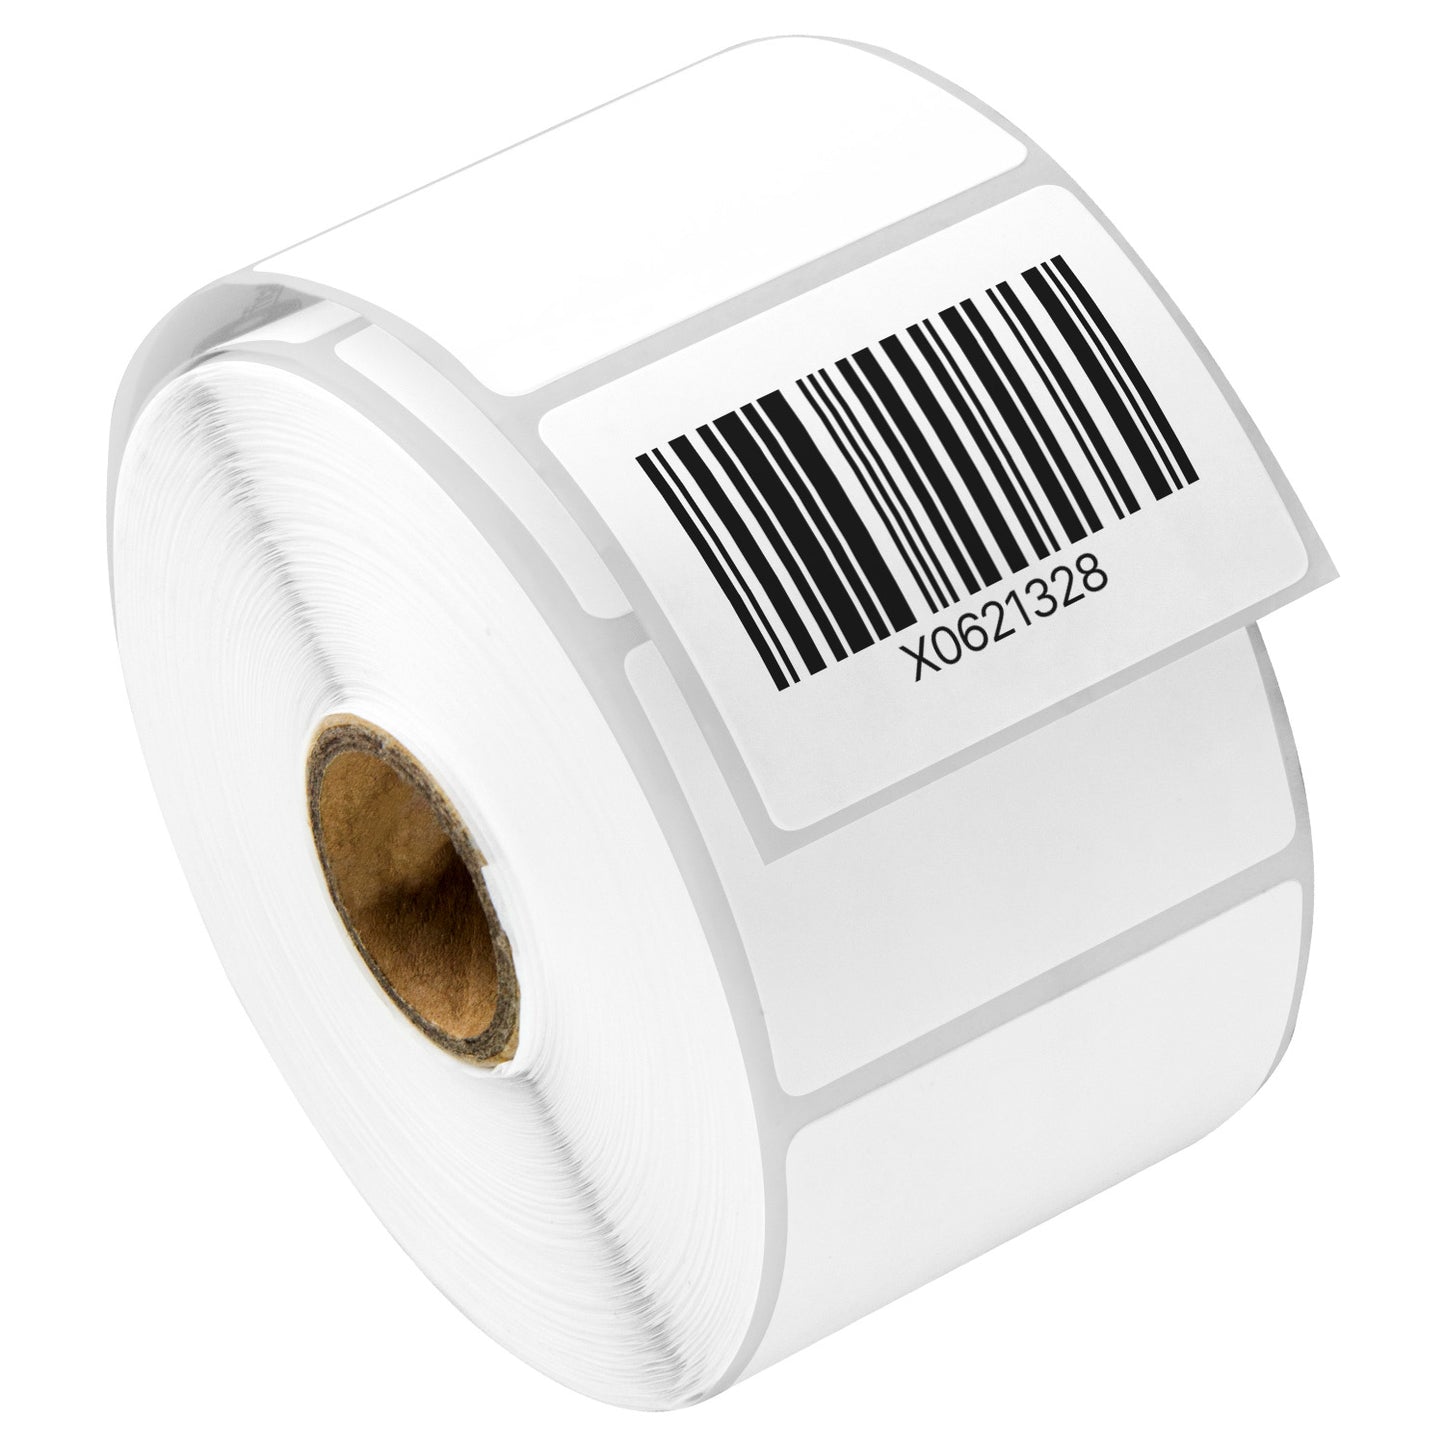 2 x 1.5 inch | Blank Direct Thermal Labels (1 inch Core)